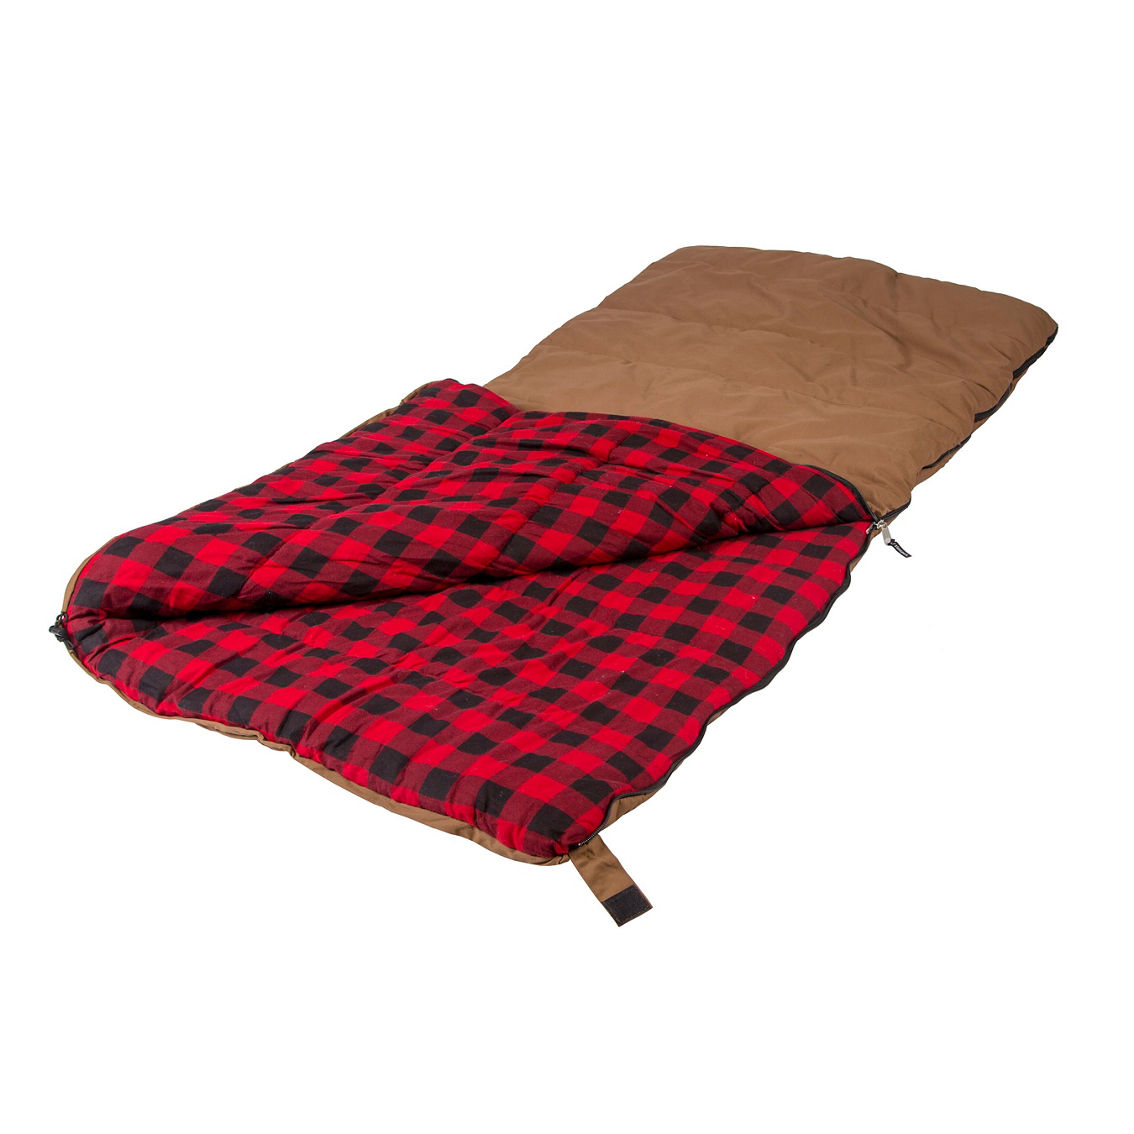 Stansport 6 lbs. Grizzly Sleeping Bag - Image 2 of 5